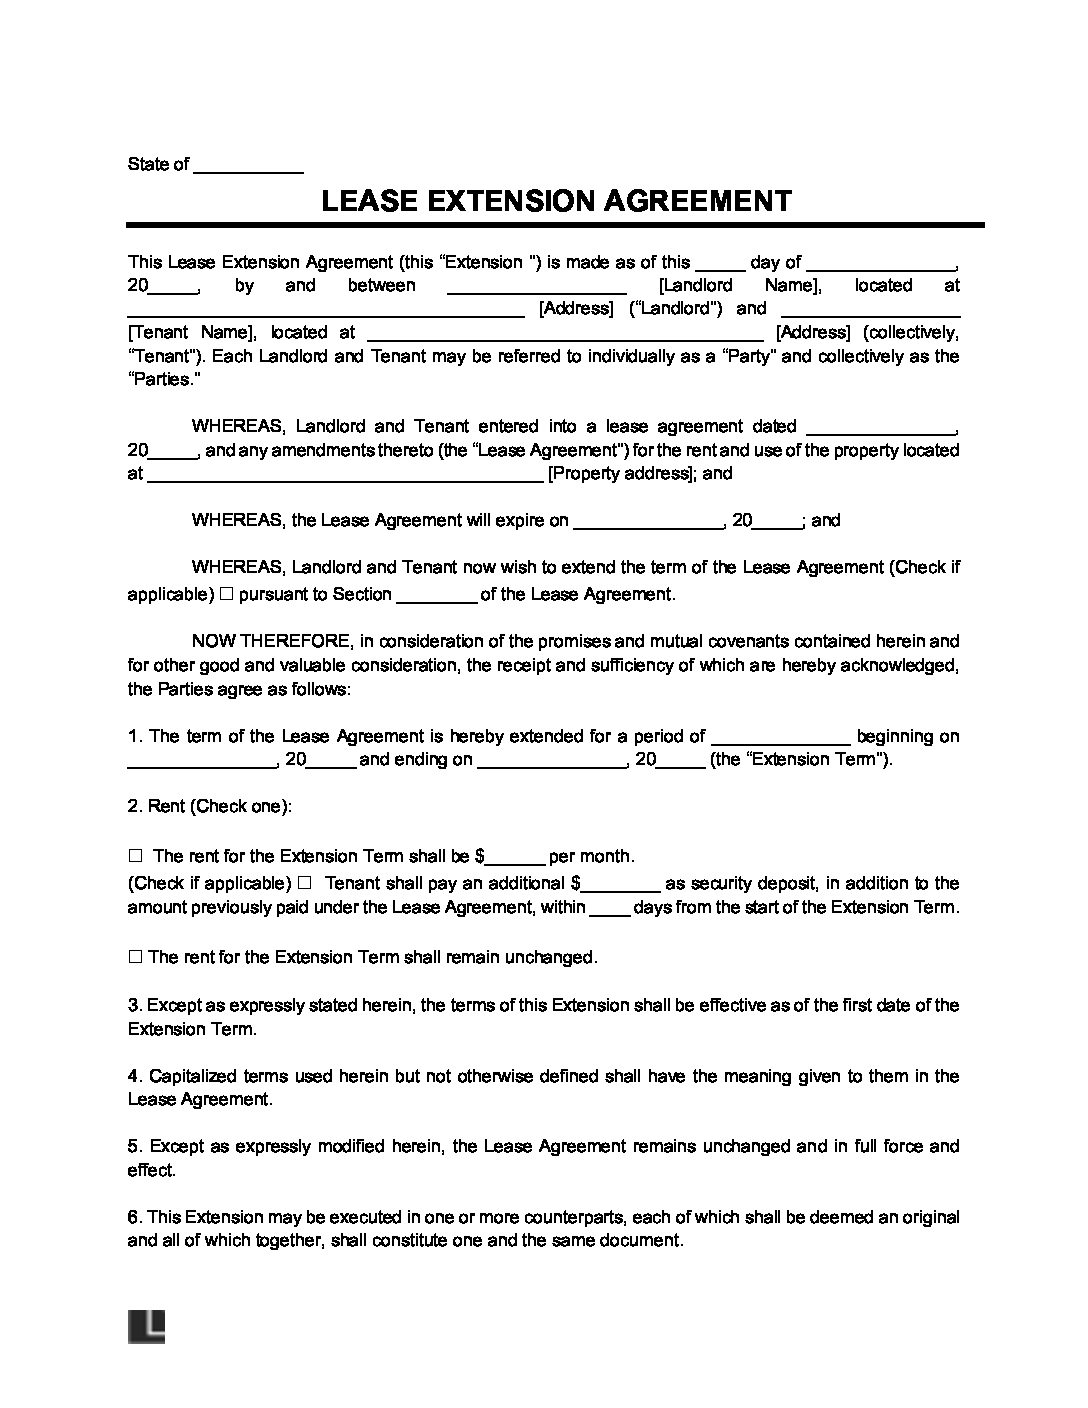 free-lease-extension-agreement-pdf-ms-word-legal-templates